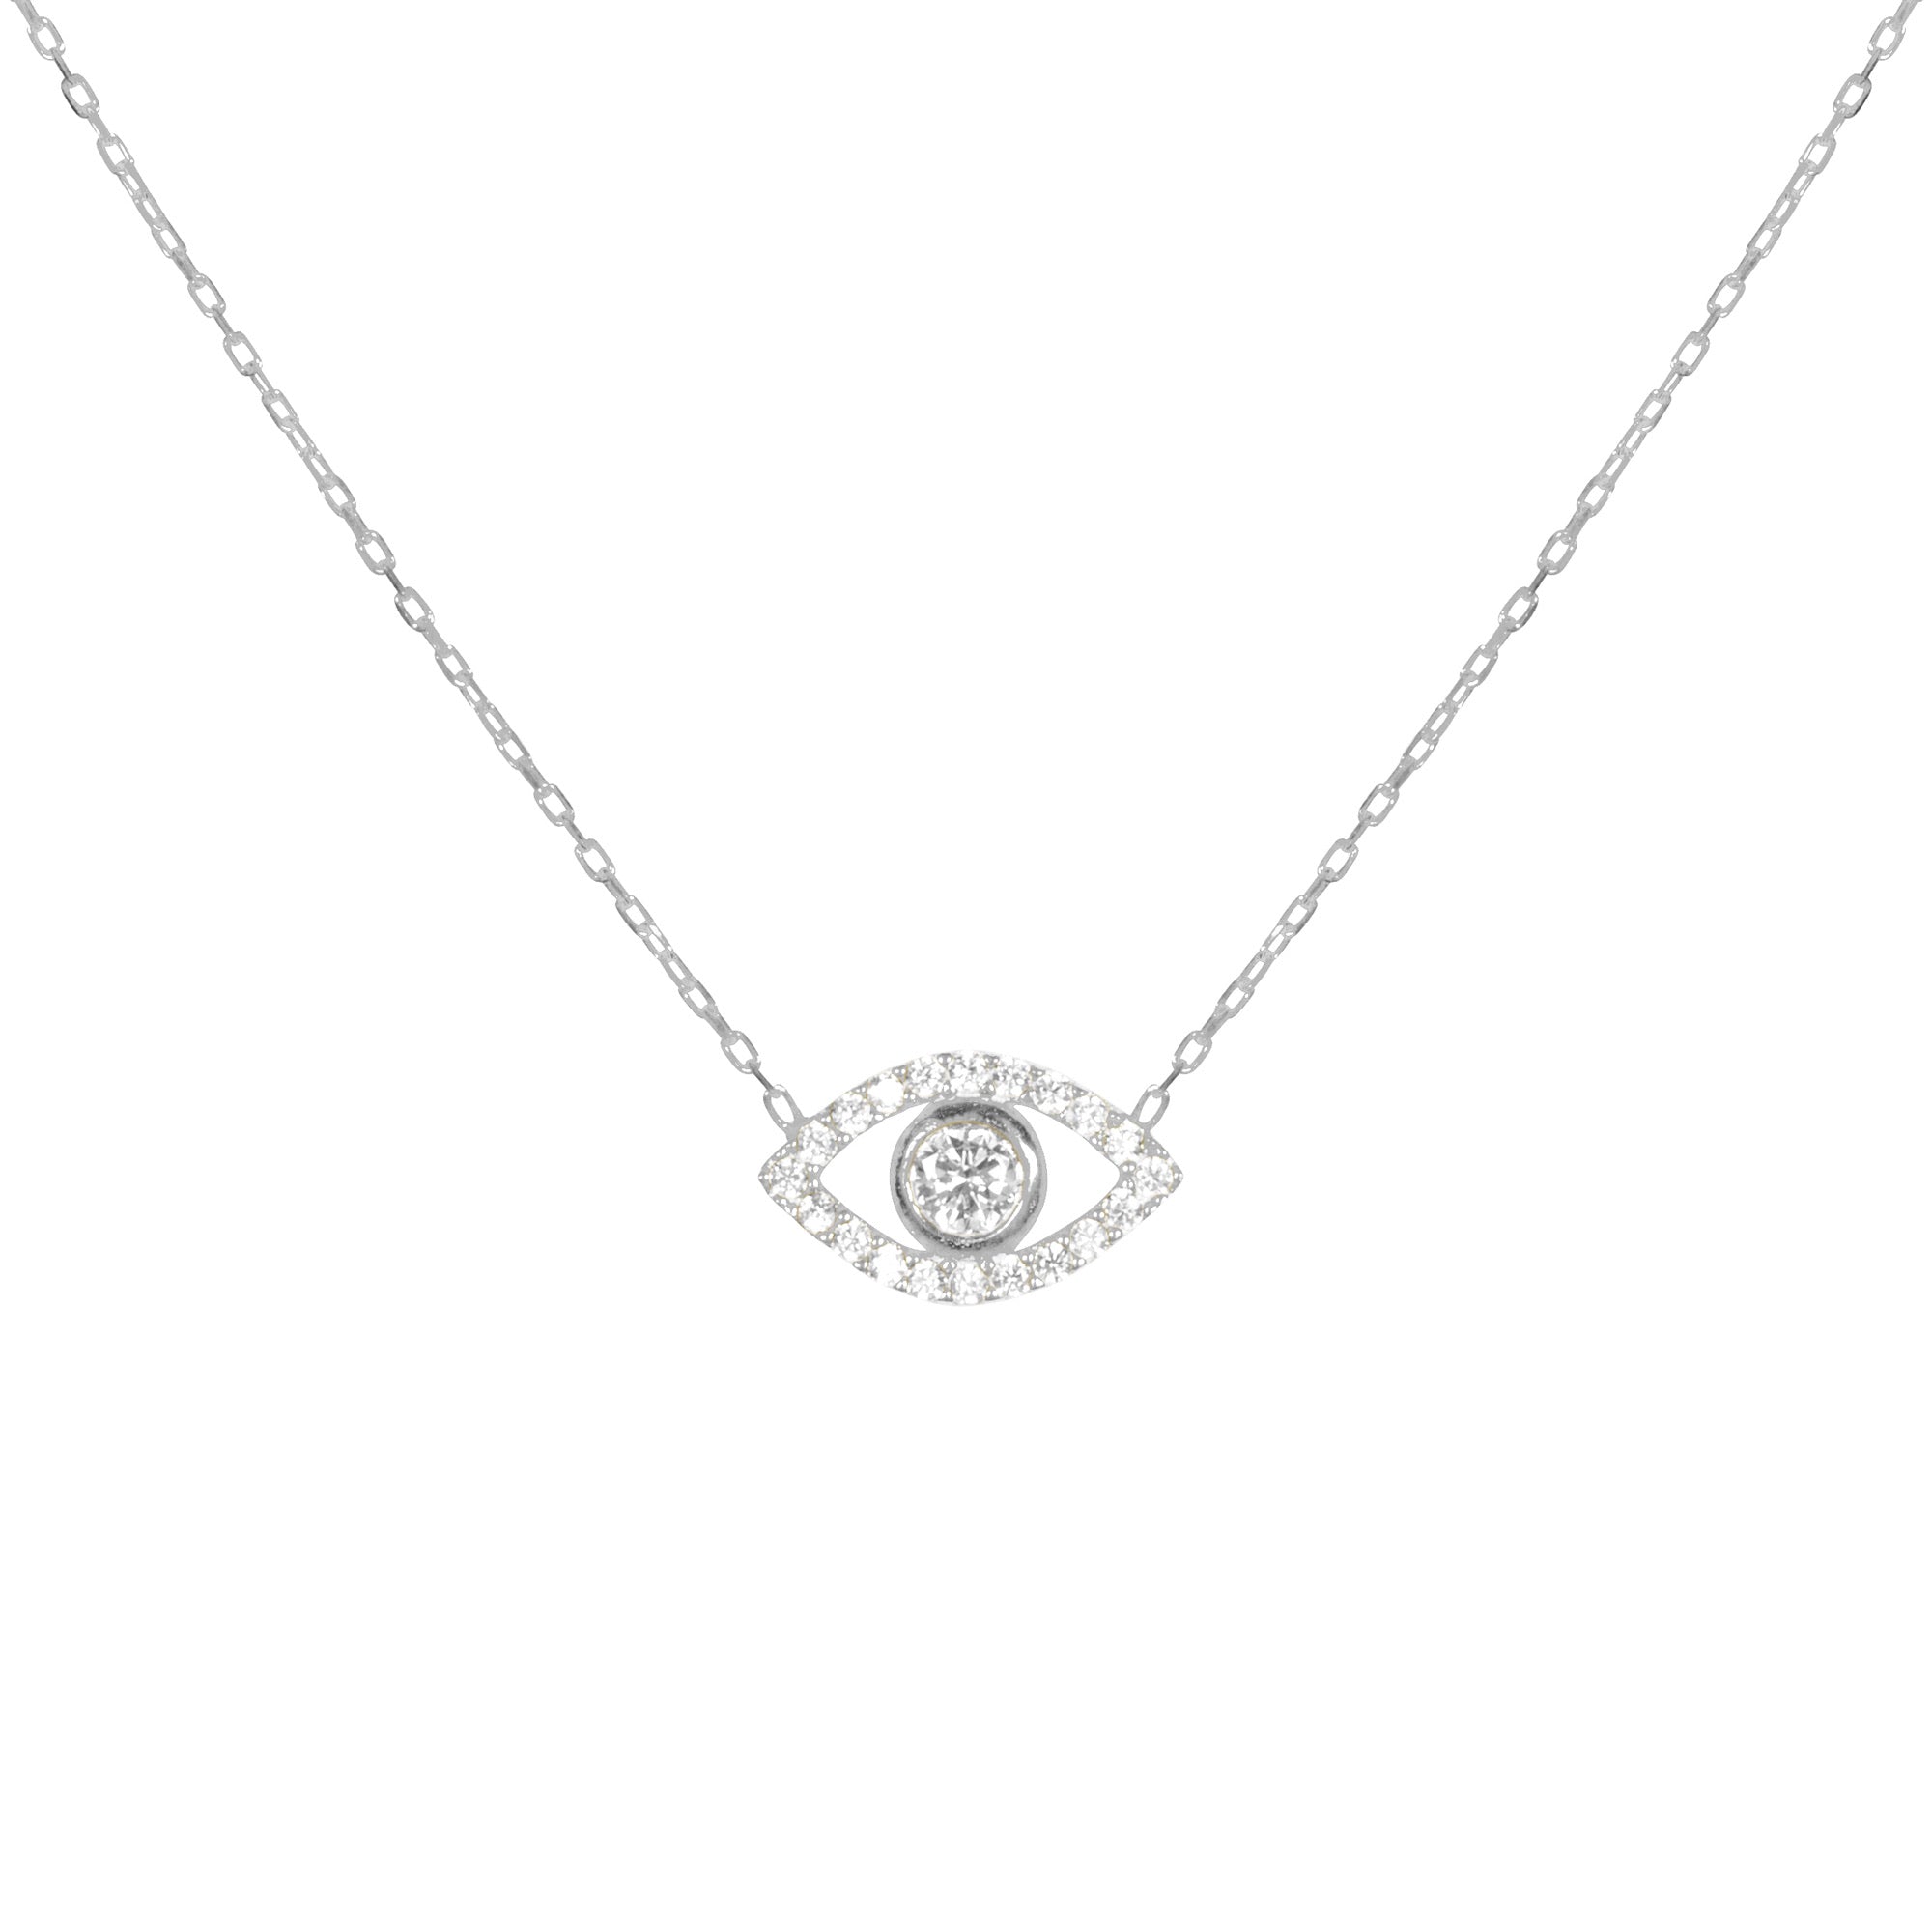 “Ojos” Sterling silver clear eye necklace